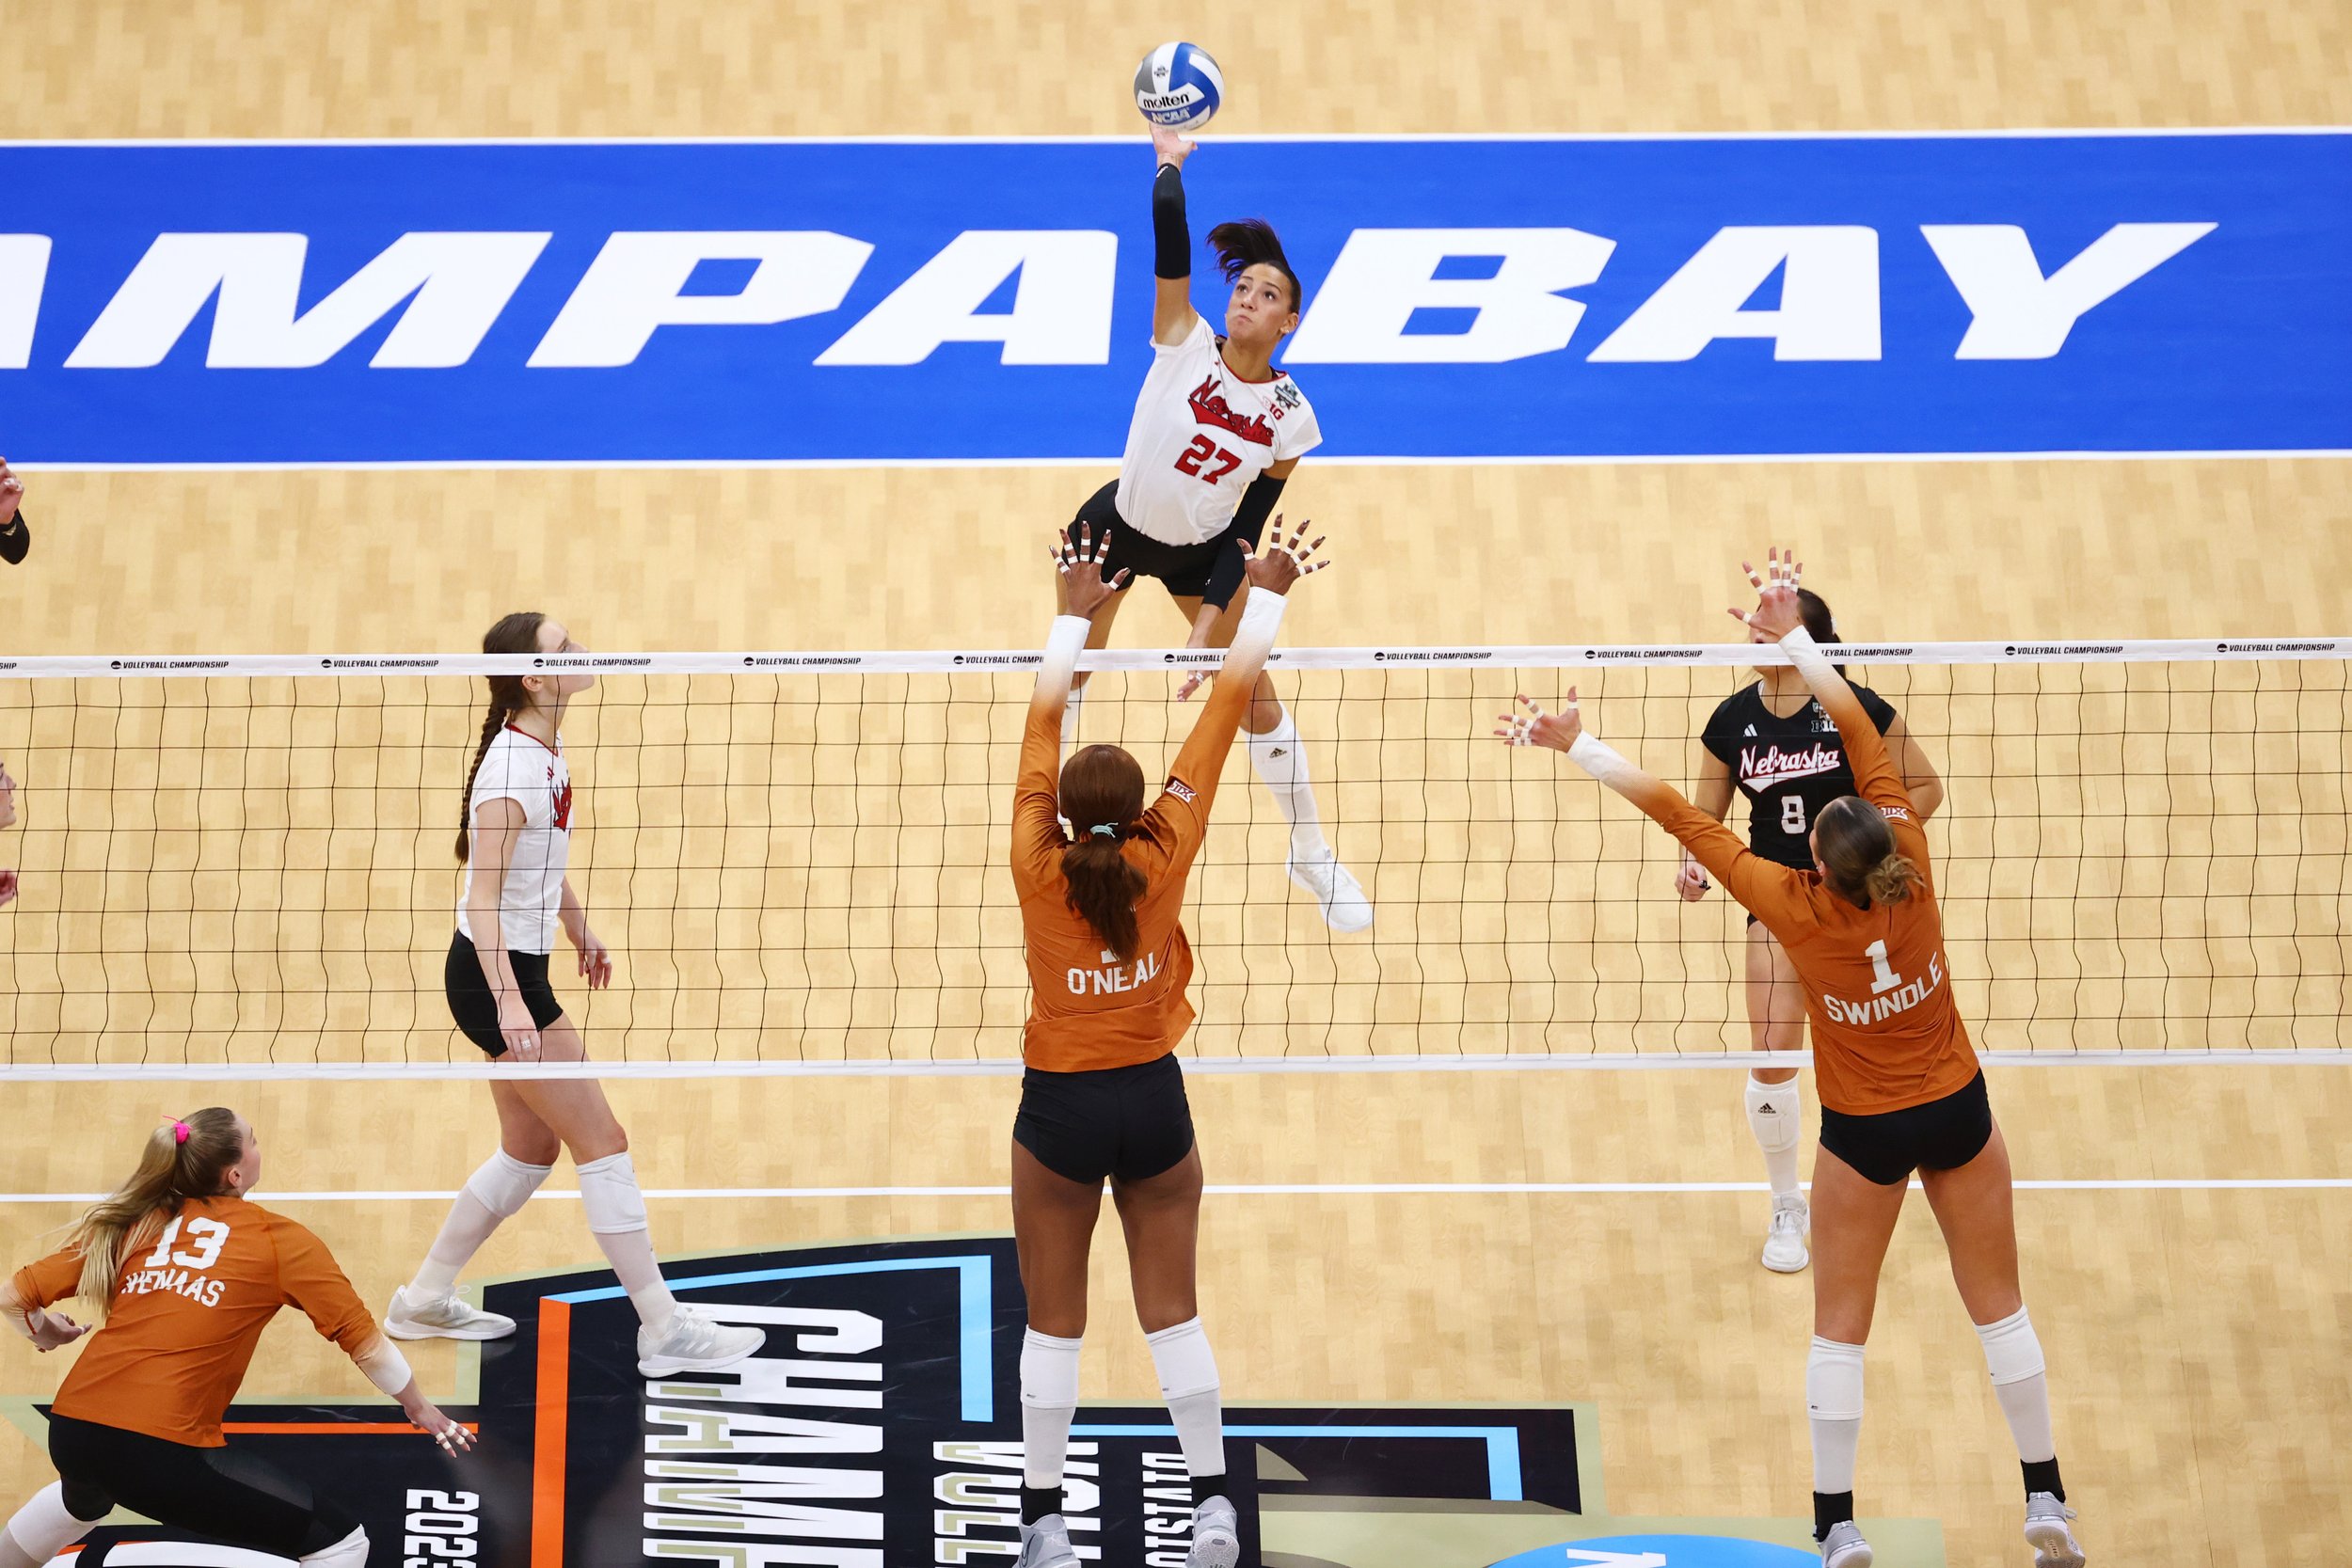  TAMPA, FLORIDA - DECEMBER 17: Harper Murray #27 of the Nebraska Cornhuskers spikes the ball against the Texas Longhorns during the 2023 Division I Women's Volleyball Championship at Amalie Arena on December 17, 2023 in Tampa, Florida. (Photo by Jami